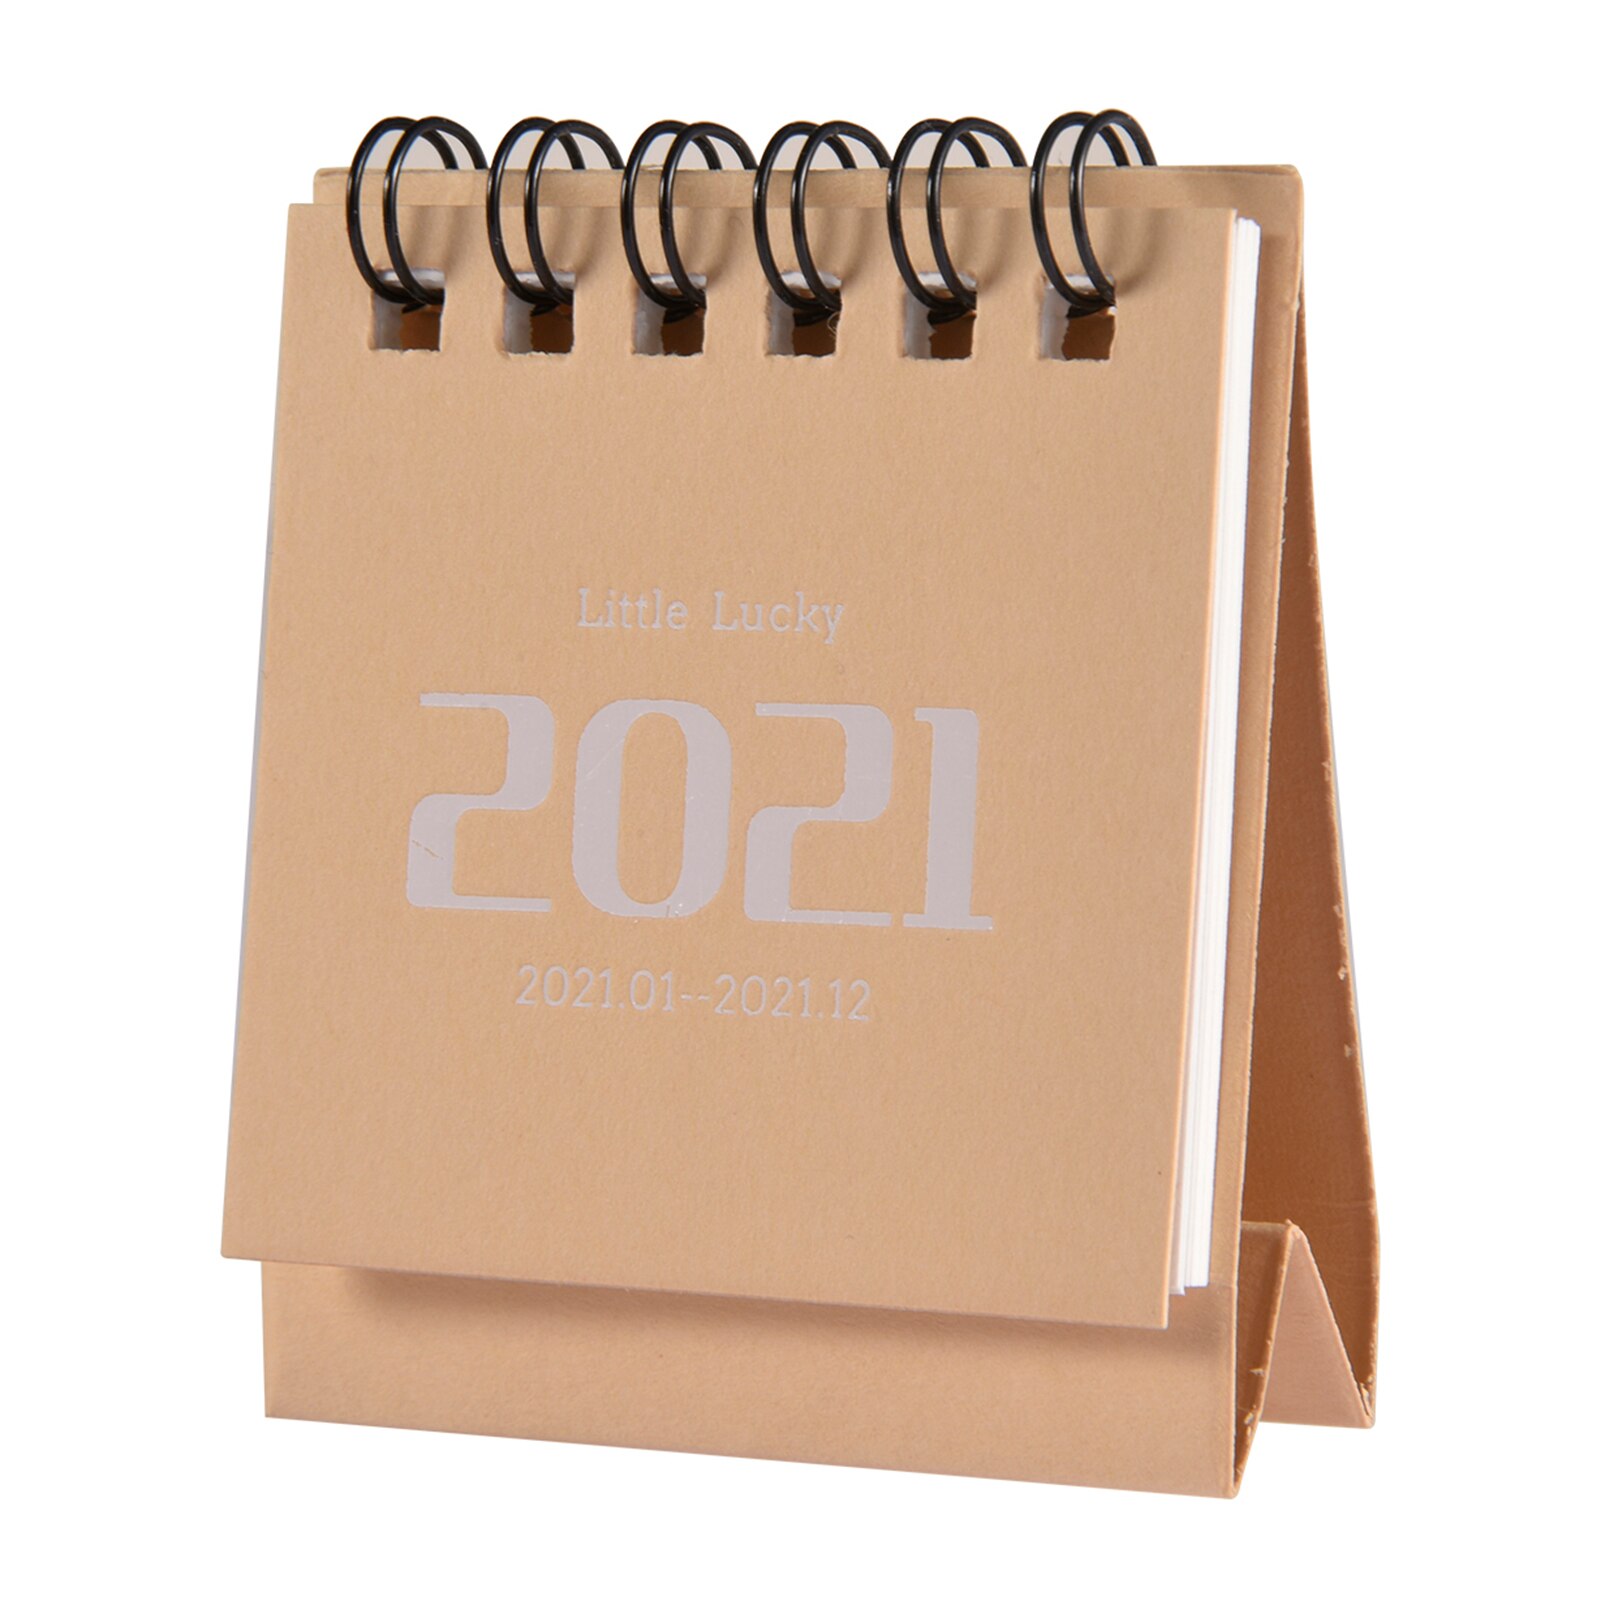 Mini Calendars Small Desk Calendar Convenient Daily Schedule Table Planner Yearly Organizer Office School Supplies